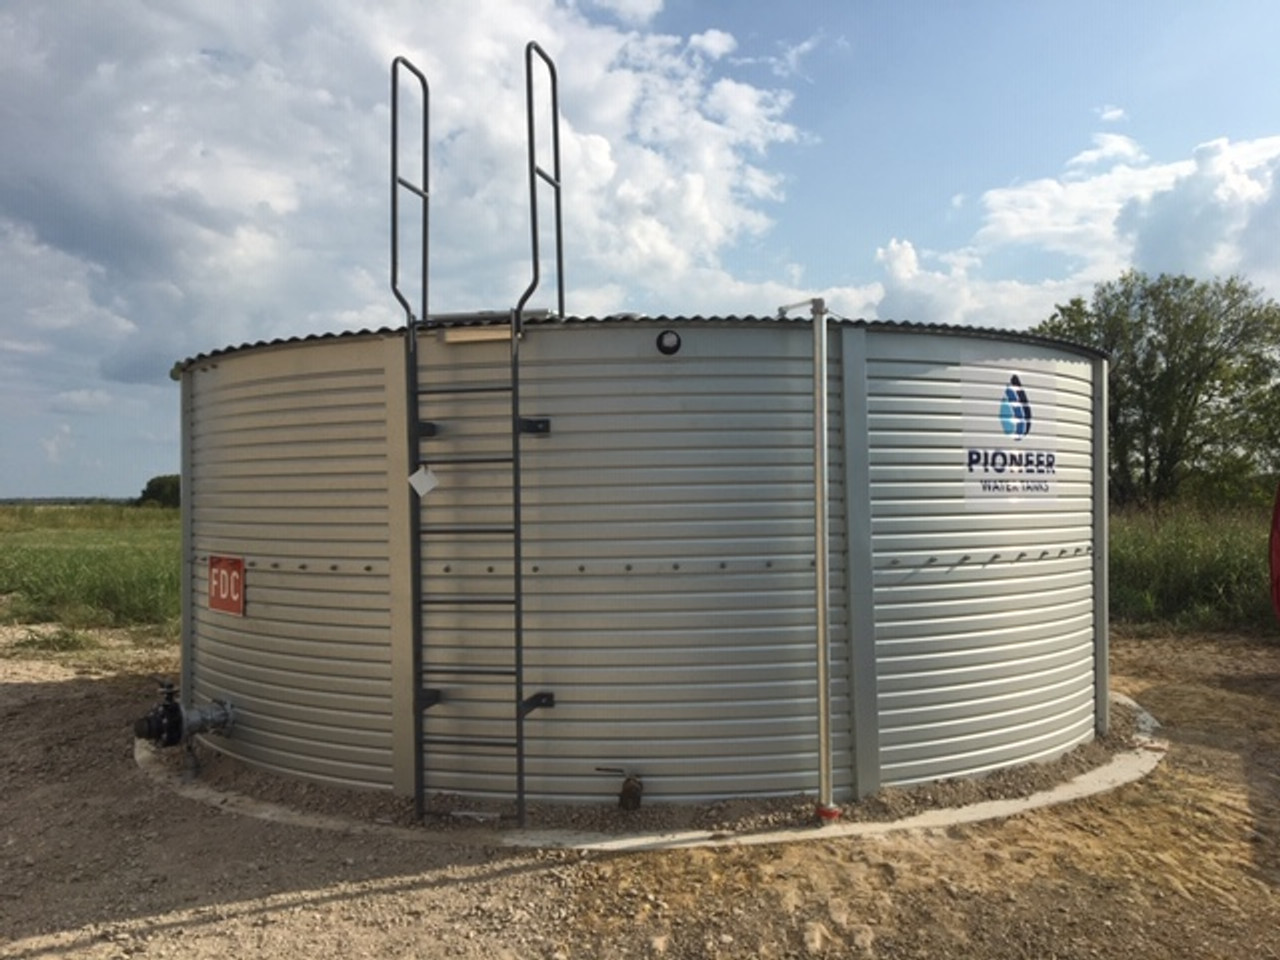 Master List of the Best Water Storage Containers and Tanks – World Water  Reserve